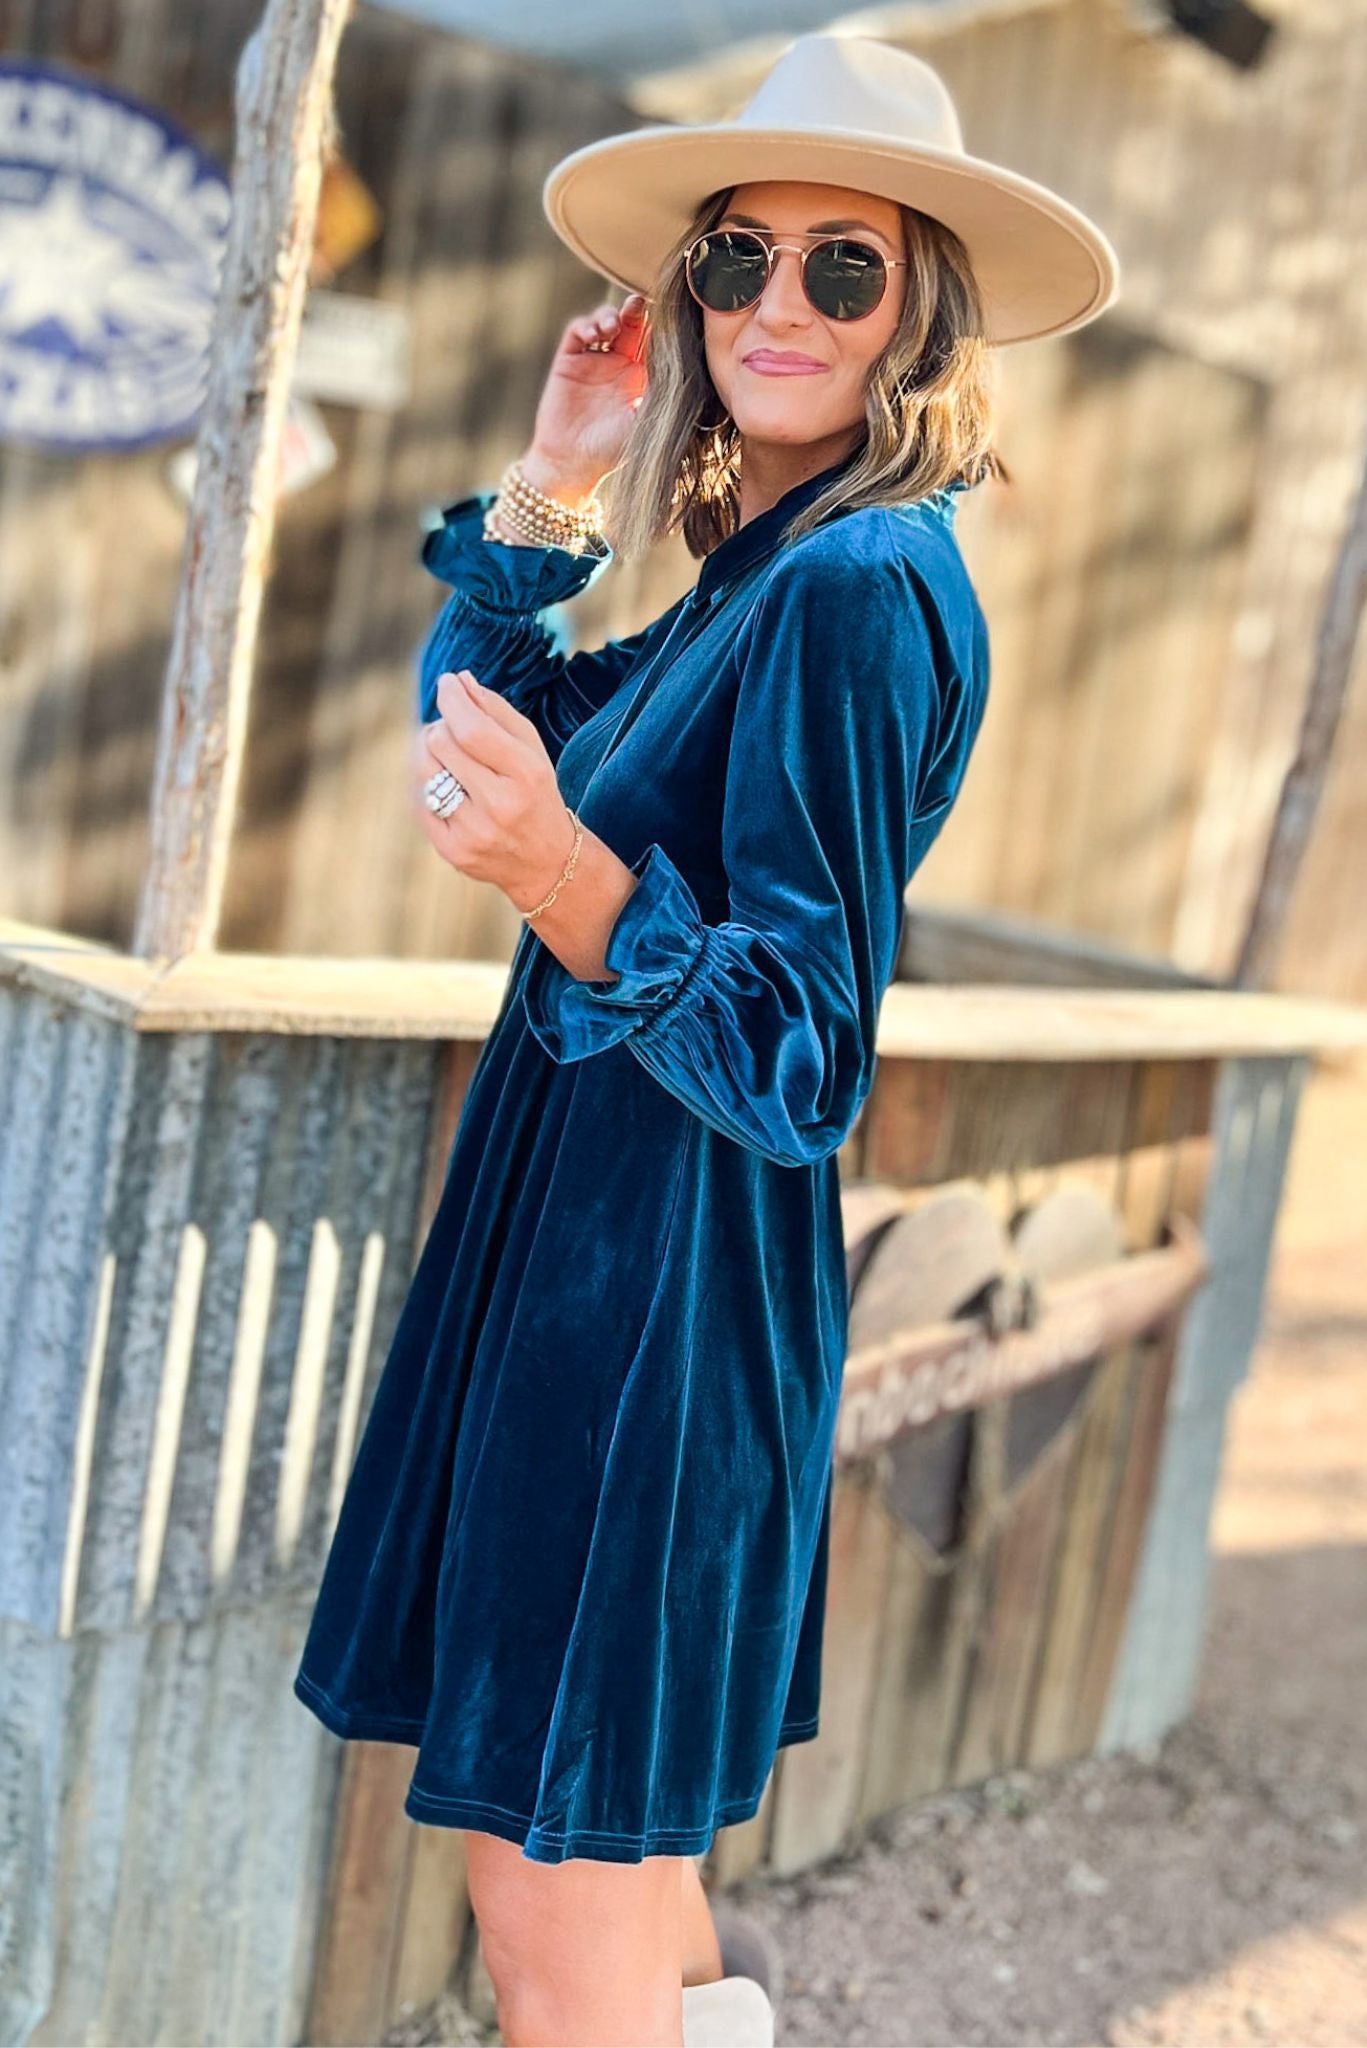 Teal Velvet Collared Button Down Hi Low Hem Babydoll Dress, fall fashion, country concert, cowgirl boots, must have, shop style your senses by mallory fitzsimmons